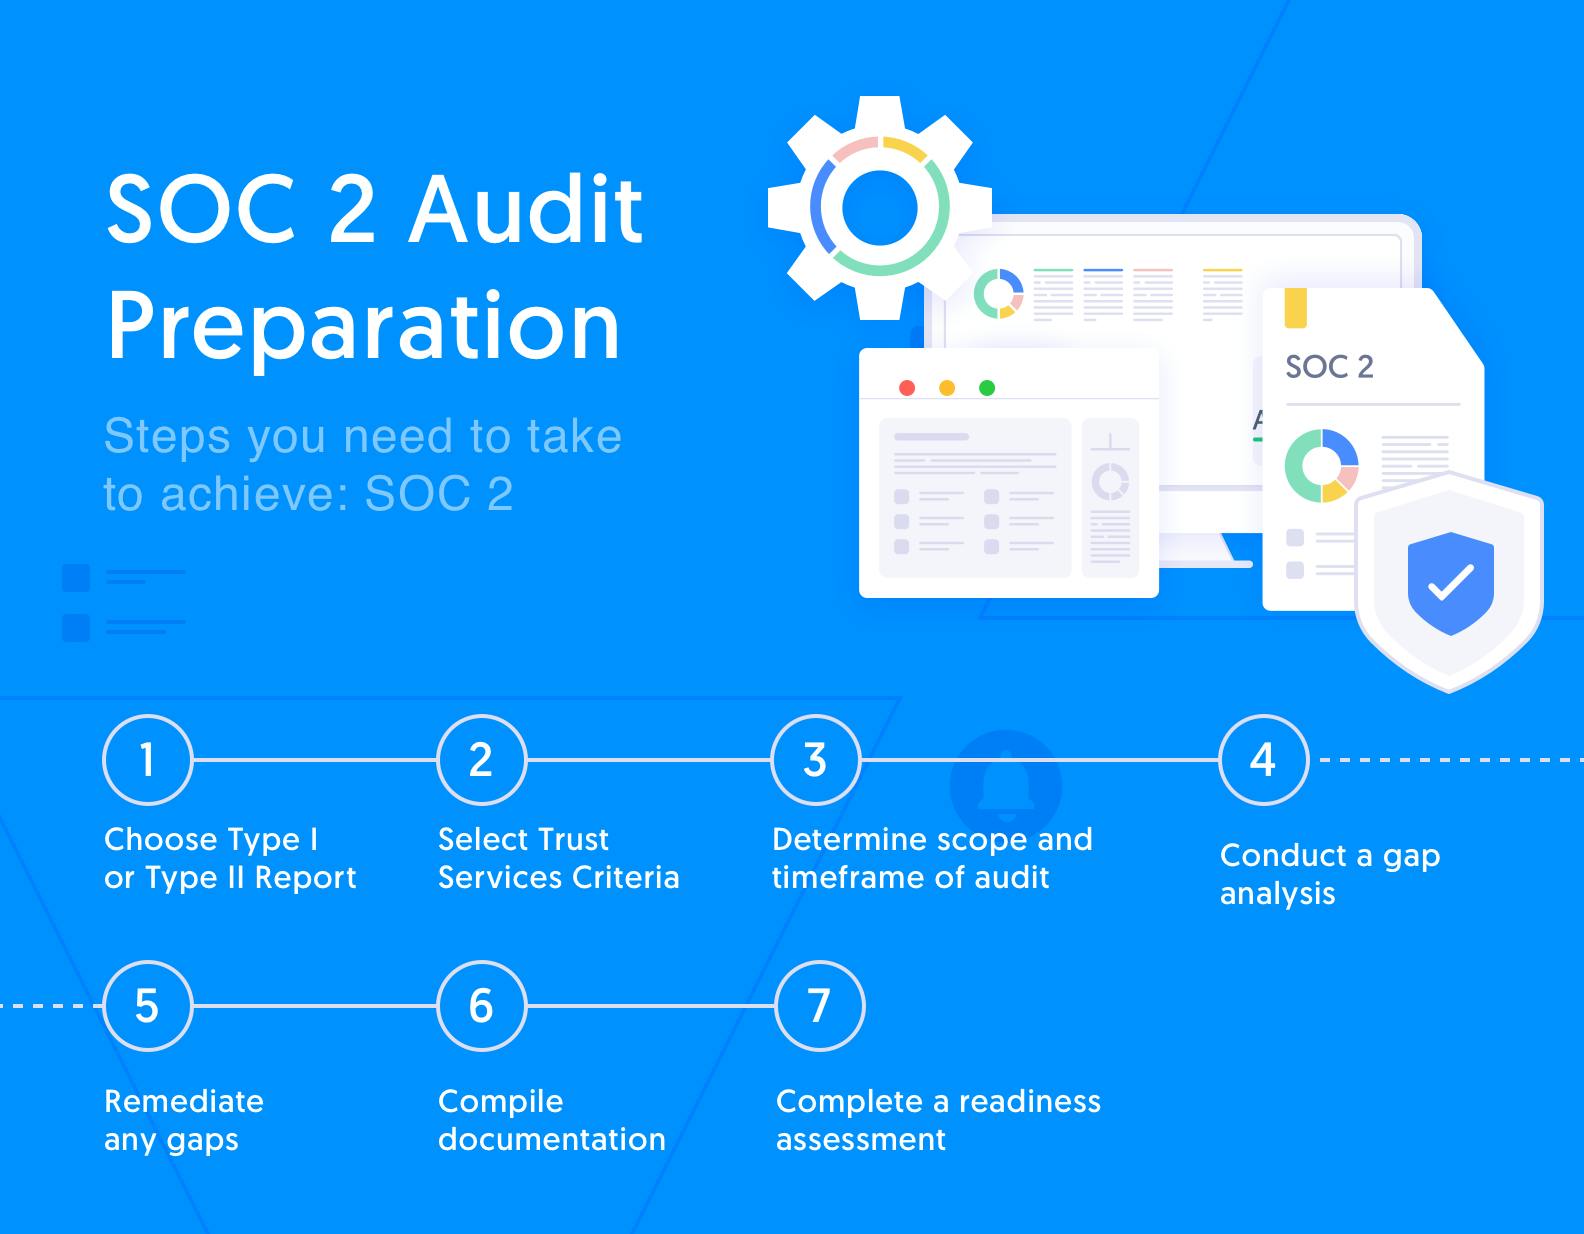 Steps to prepare for SOC2 audit: choosing report type and TSC, gap analysis and remediation, documentation